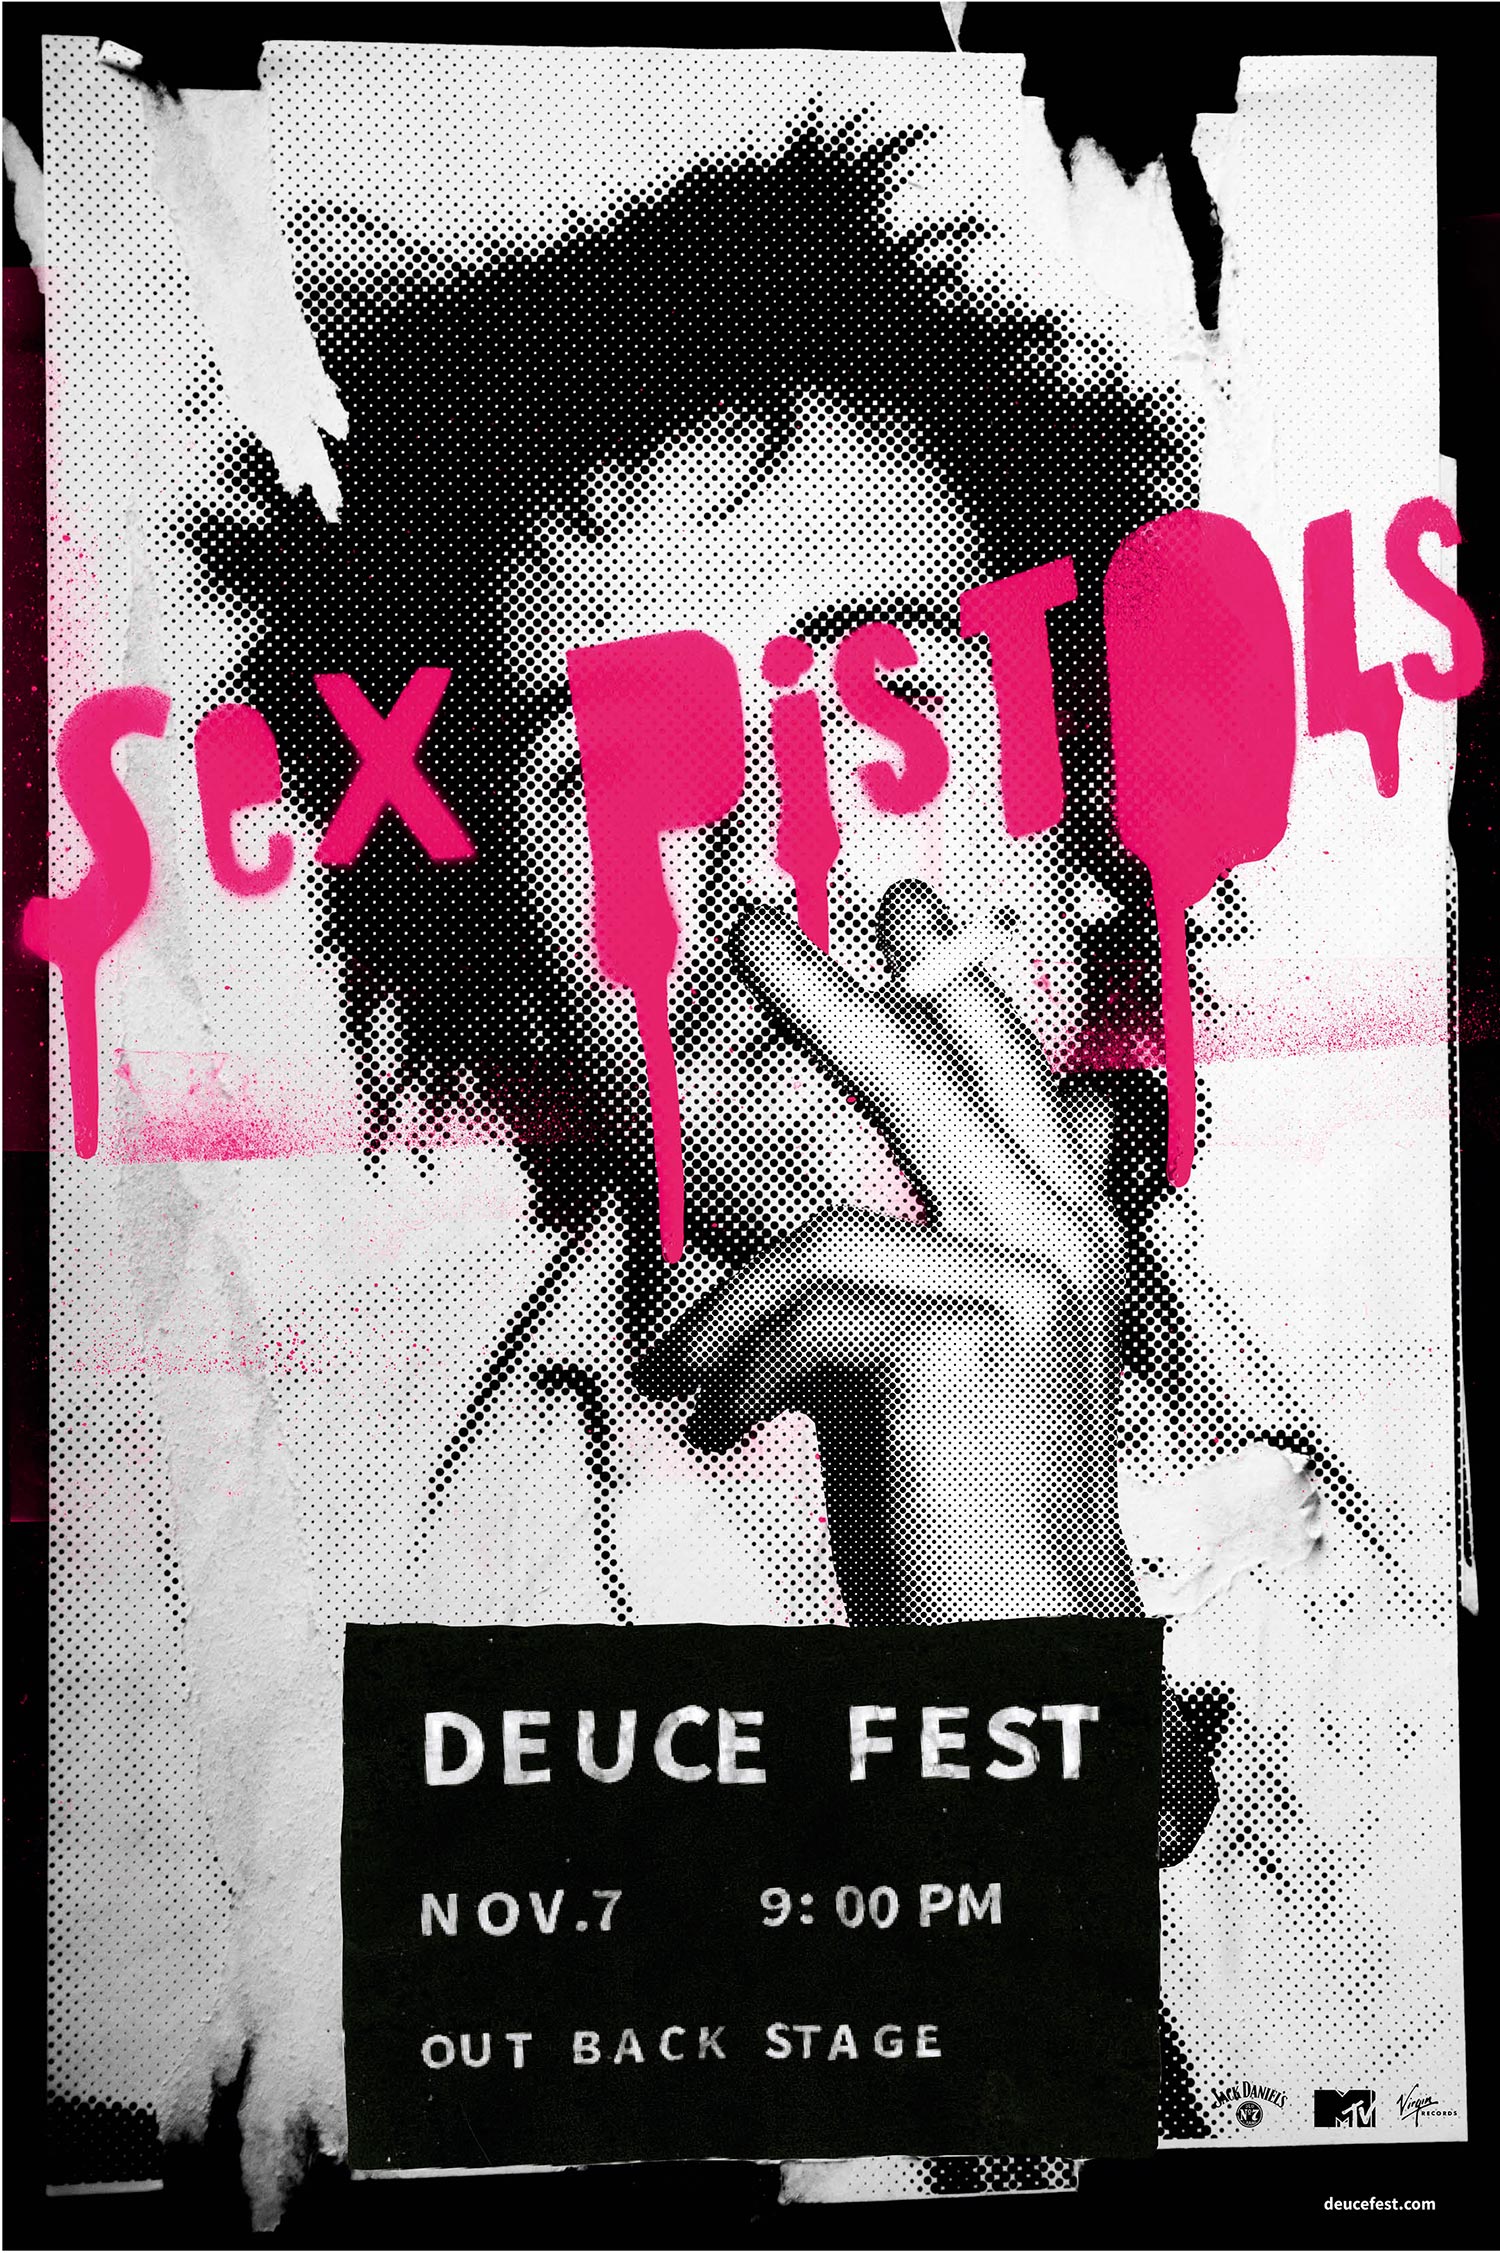 Sex Pistols, Deuce Fest - illustrated poster by Rae Maher